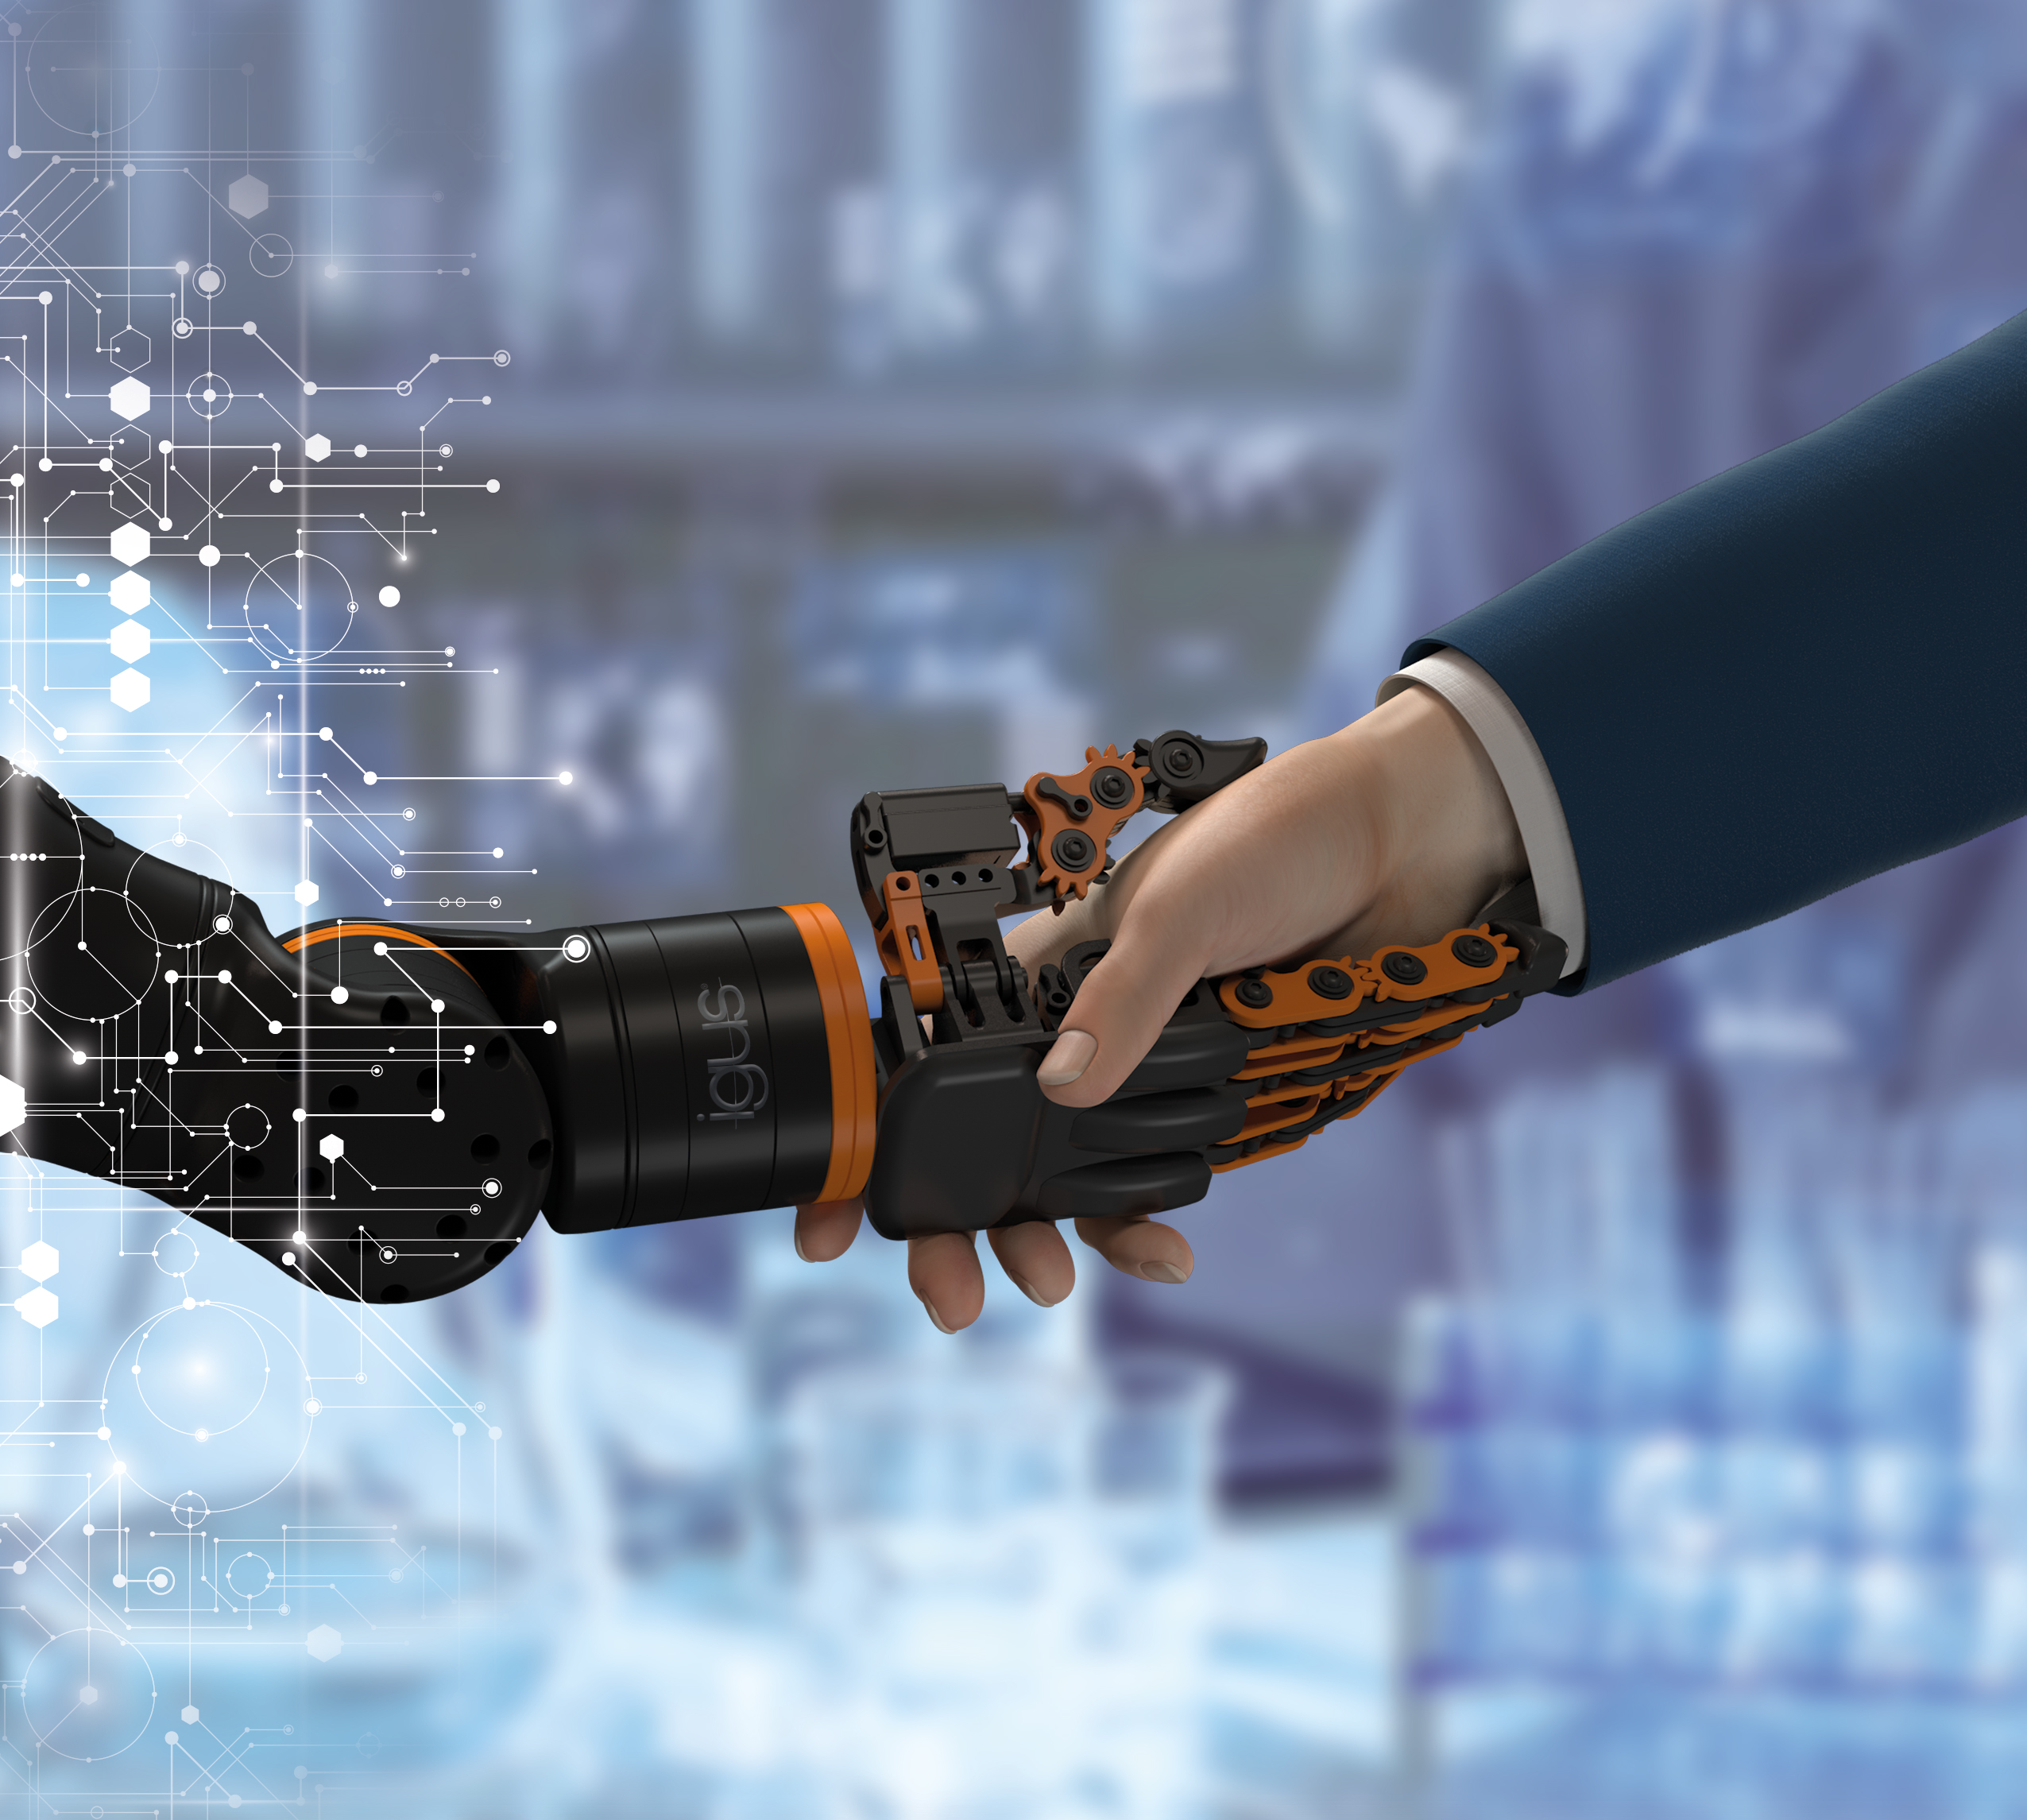 You are currently viewing Robots-Weblog | Igus expands its portfolio across the ReBeL with a humanoid hand fabricated from lubrication-free high-performance plastics